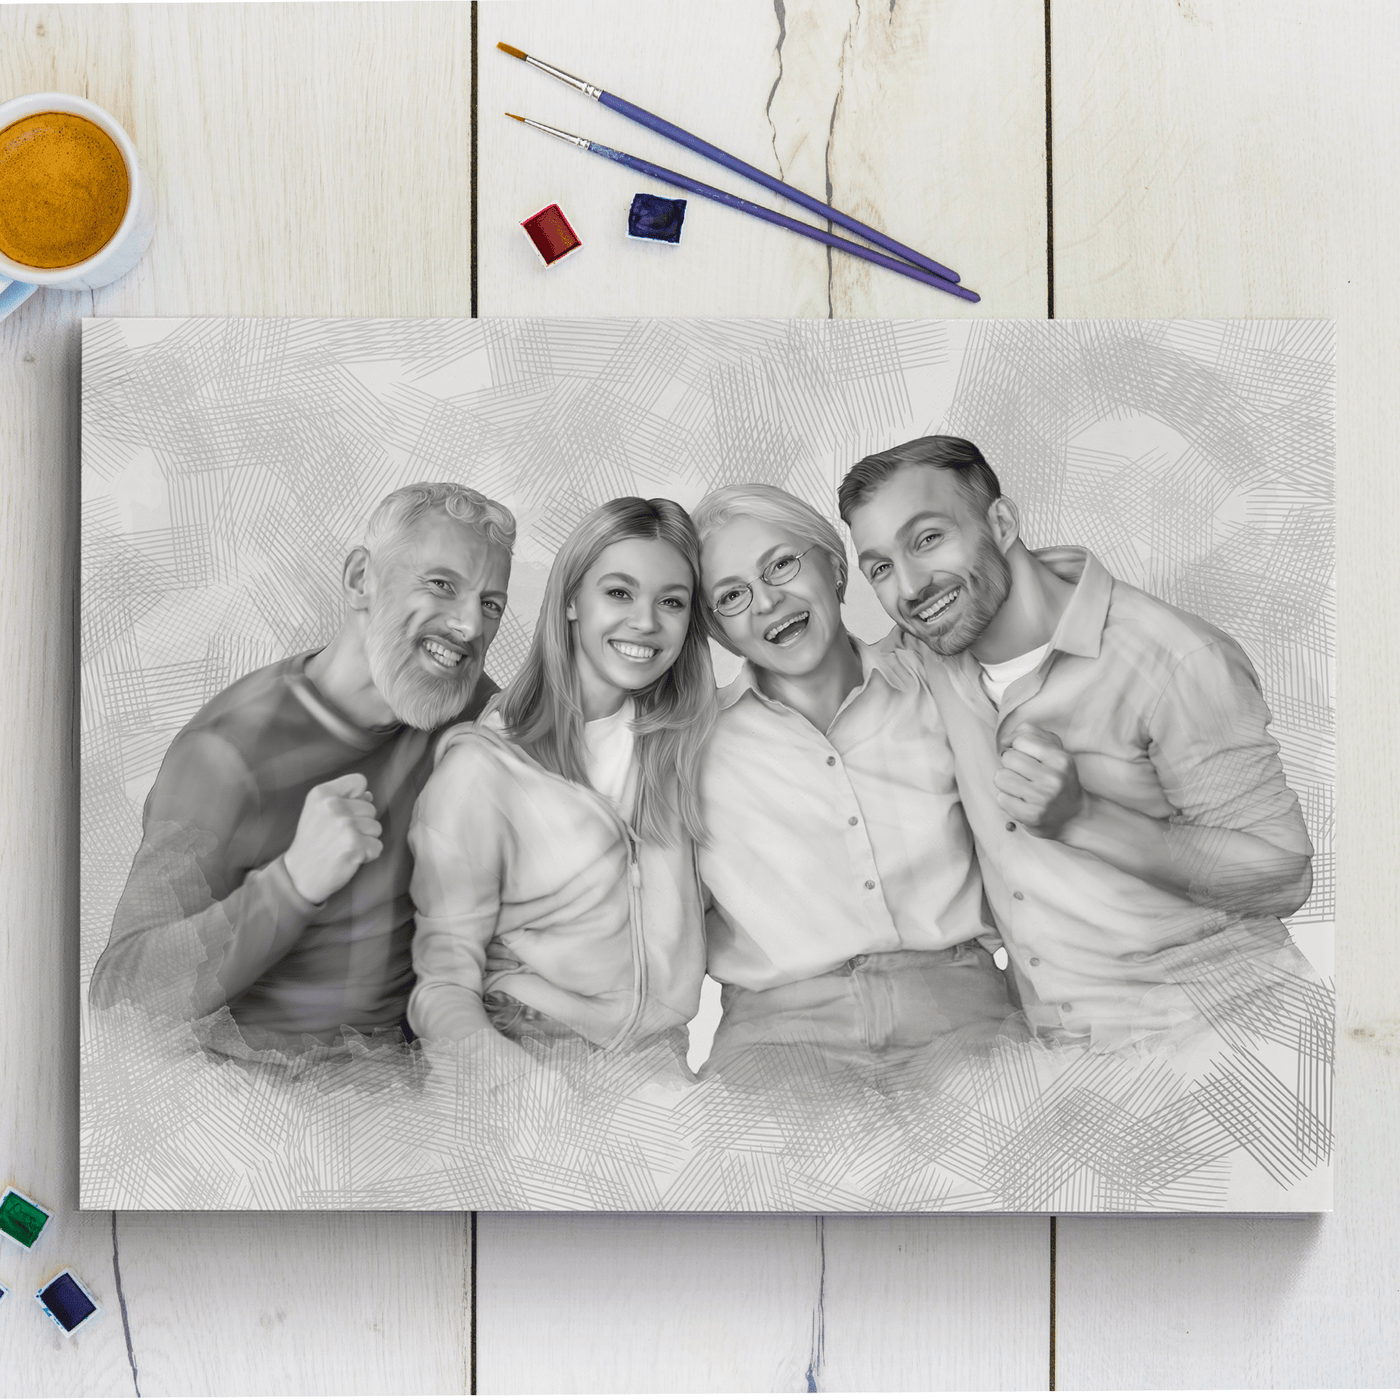 mother pencil drawing of a family drawn black and white